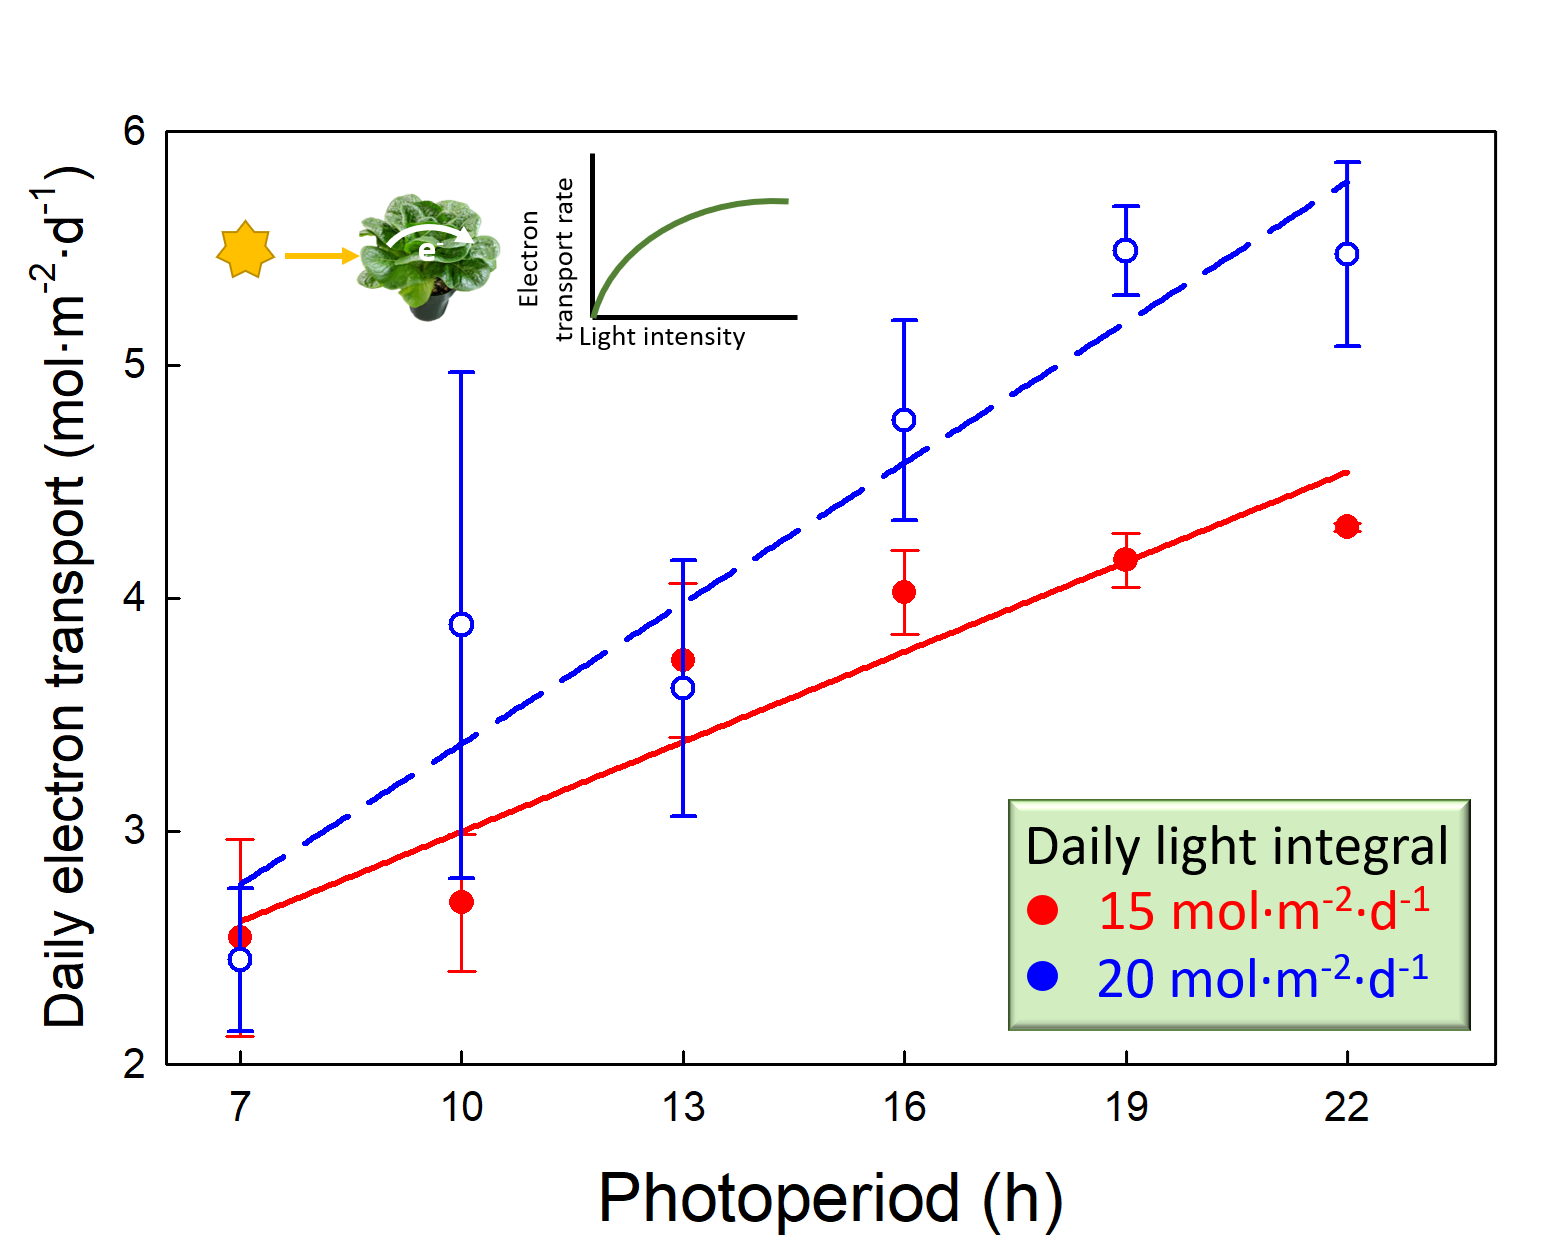 Plants | Free Full-Text | Photoperiods with the Same Daily Light Integral Increase Daily Transport through Photosystem II in Lettuce